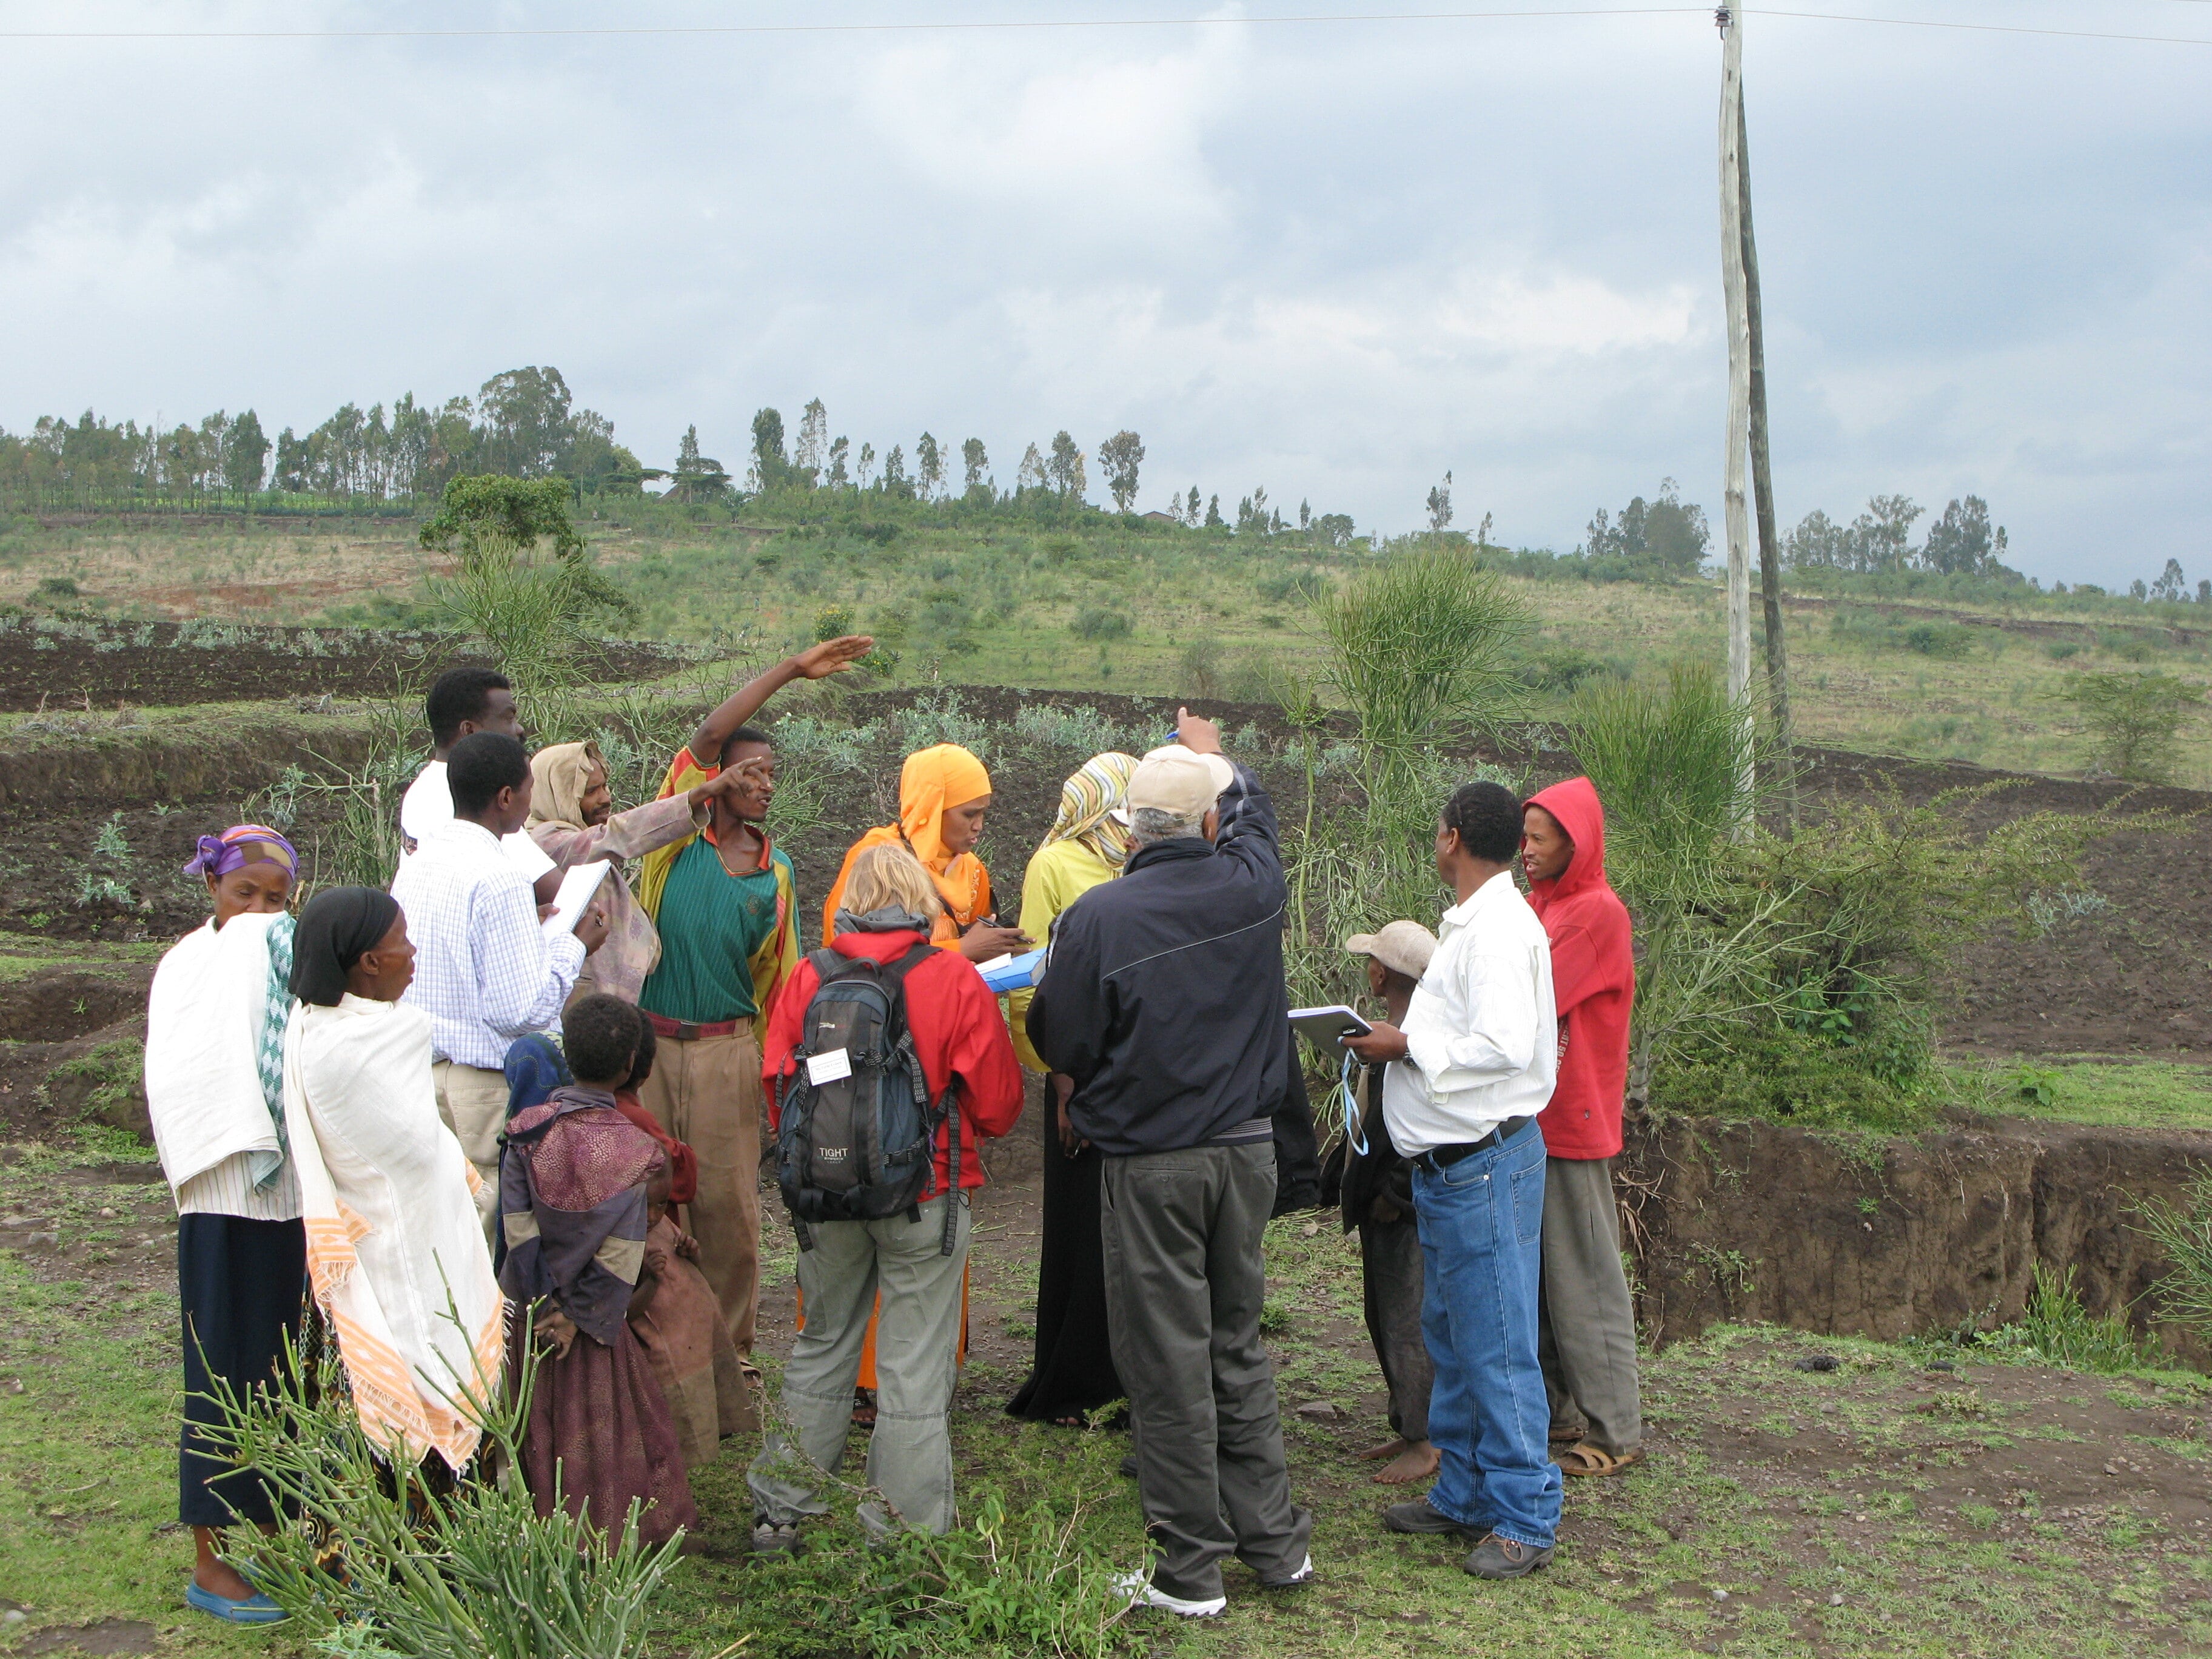 The picture shows land use planning for a research and training course together with local people in an area affected by erosion in Ethiopia.